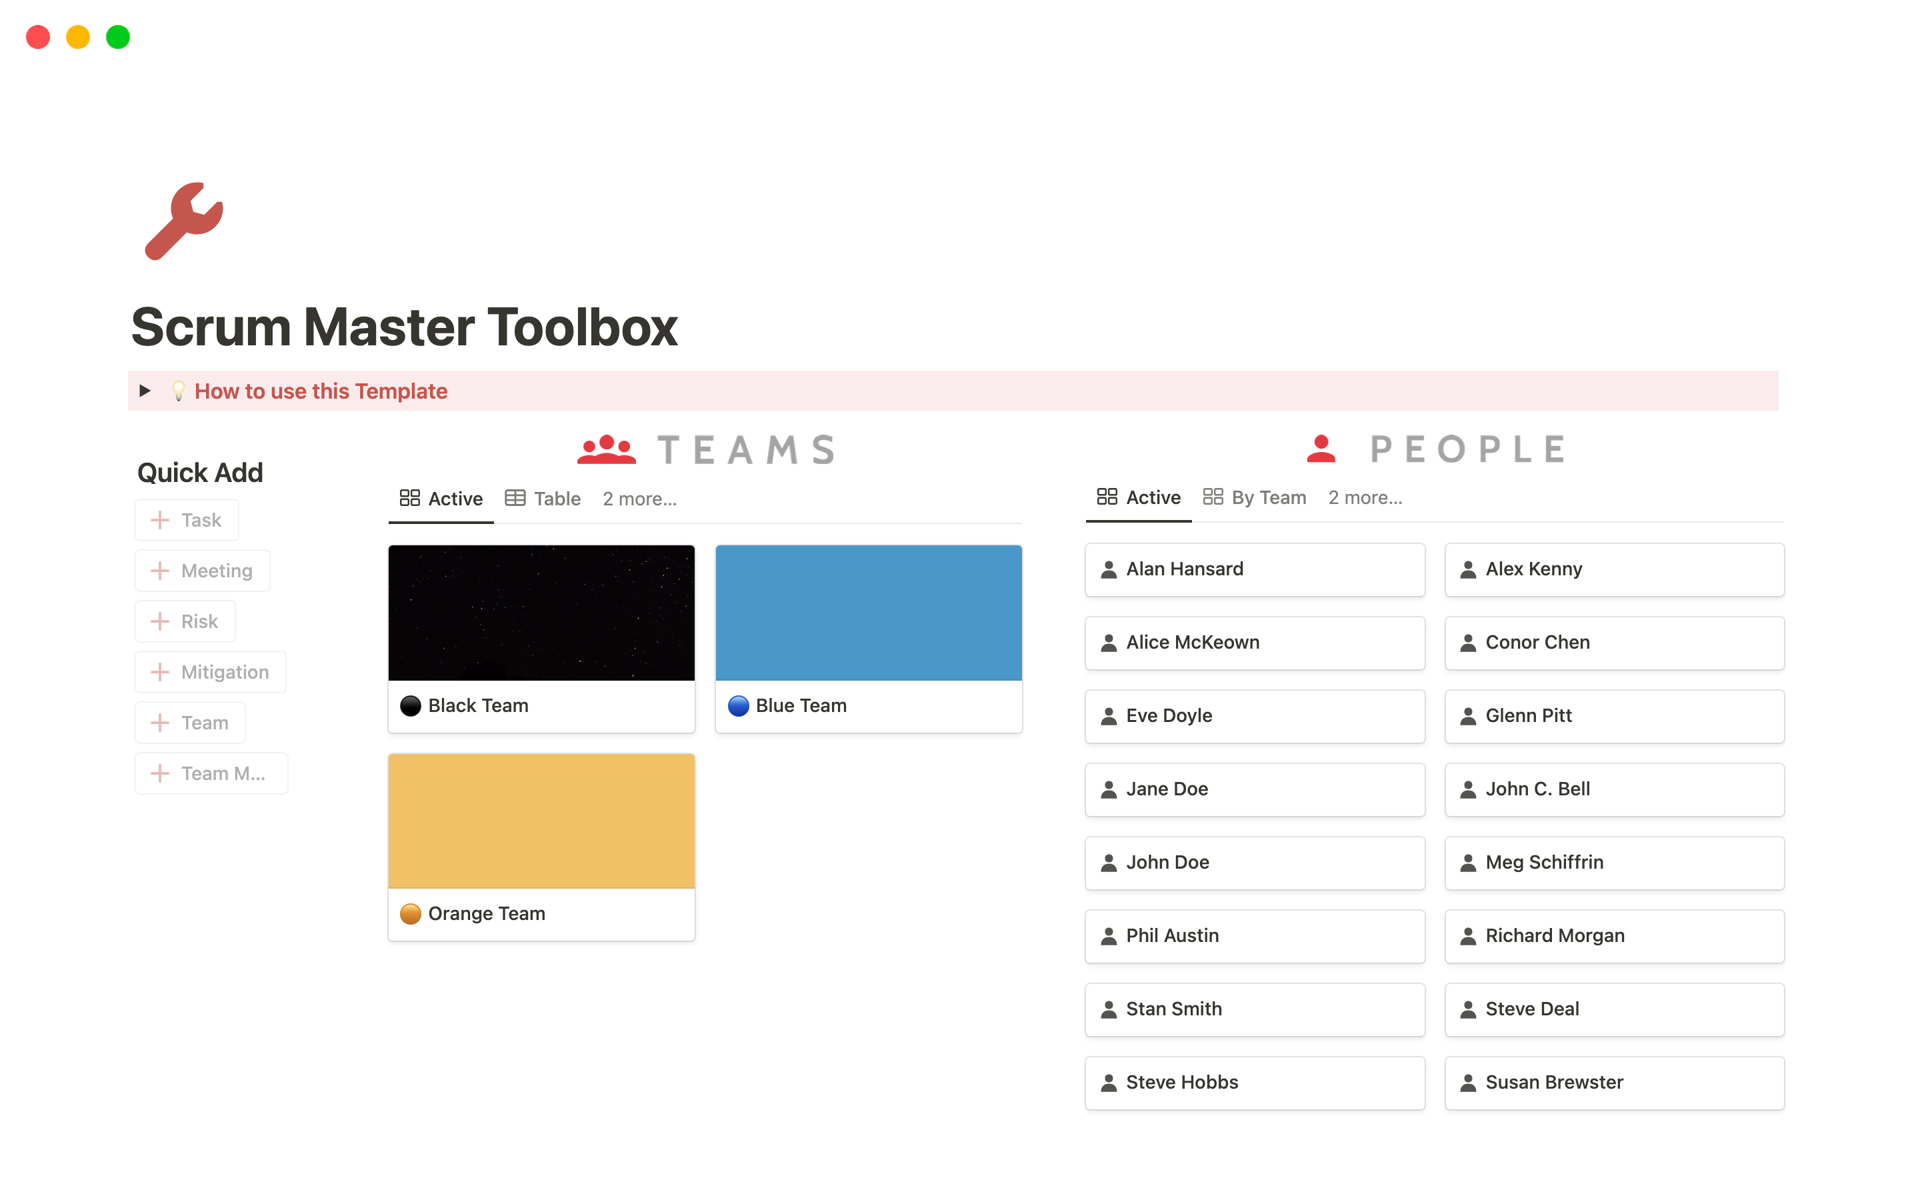 Manage all important information related to your teams and team members in one place.
Comprehensive template for having a complete overview of what your teams and people are working on.